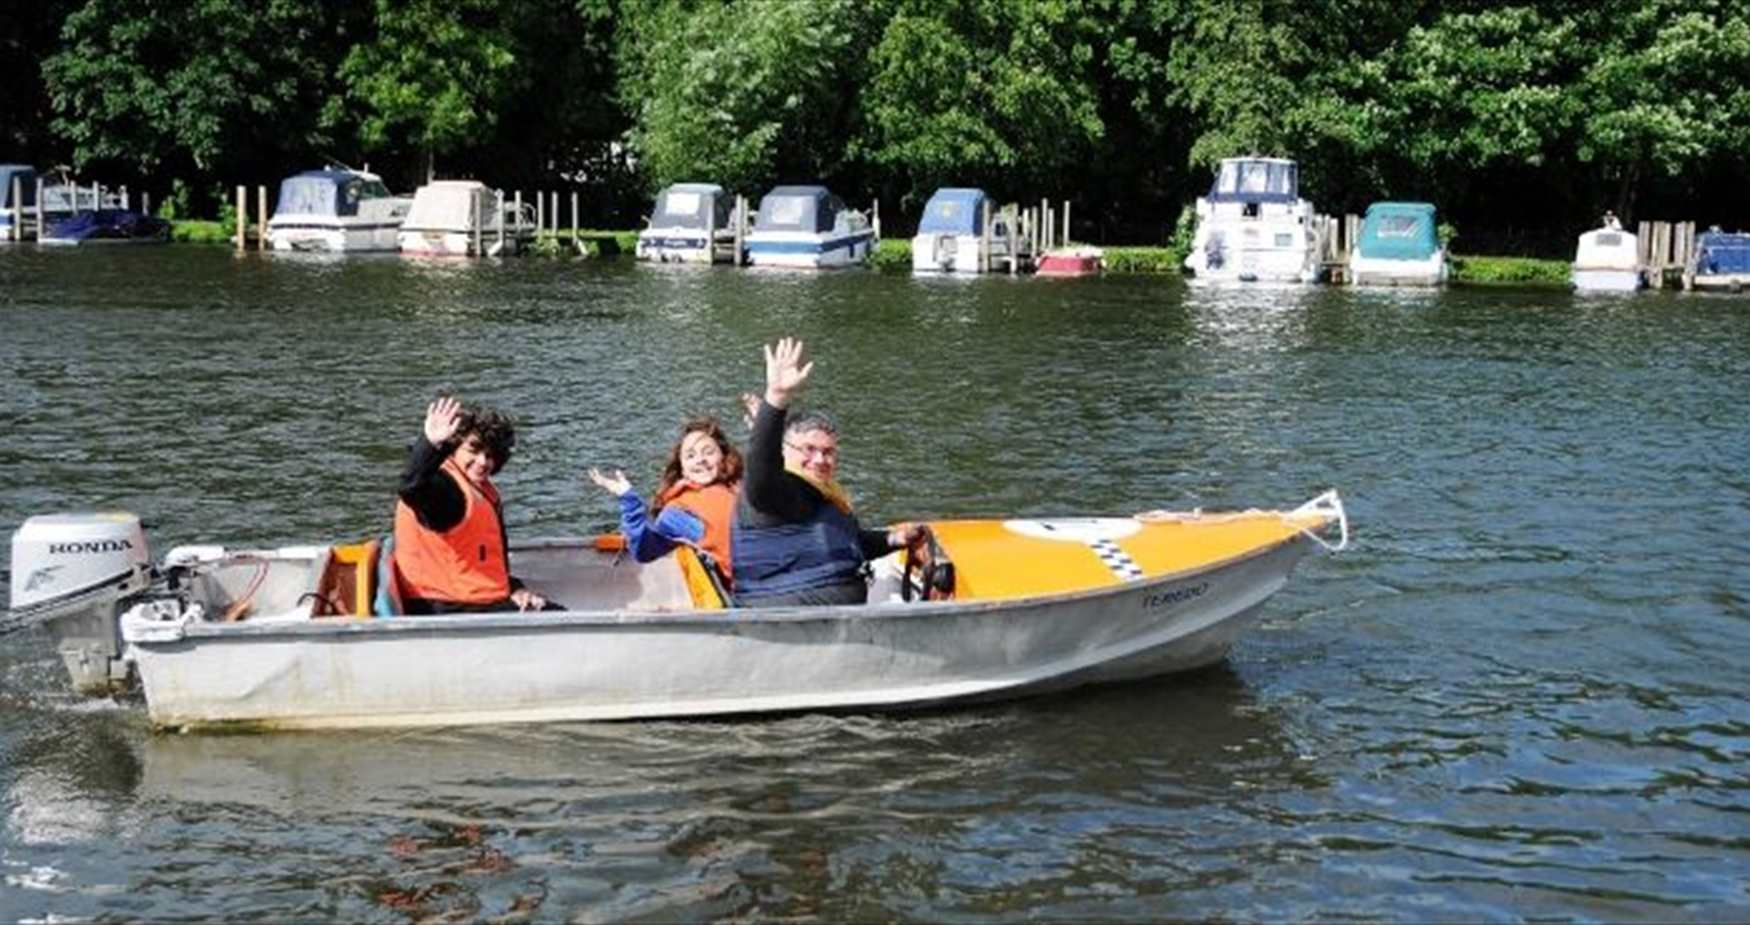 Boat hire at Hobbs of Henley